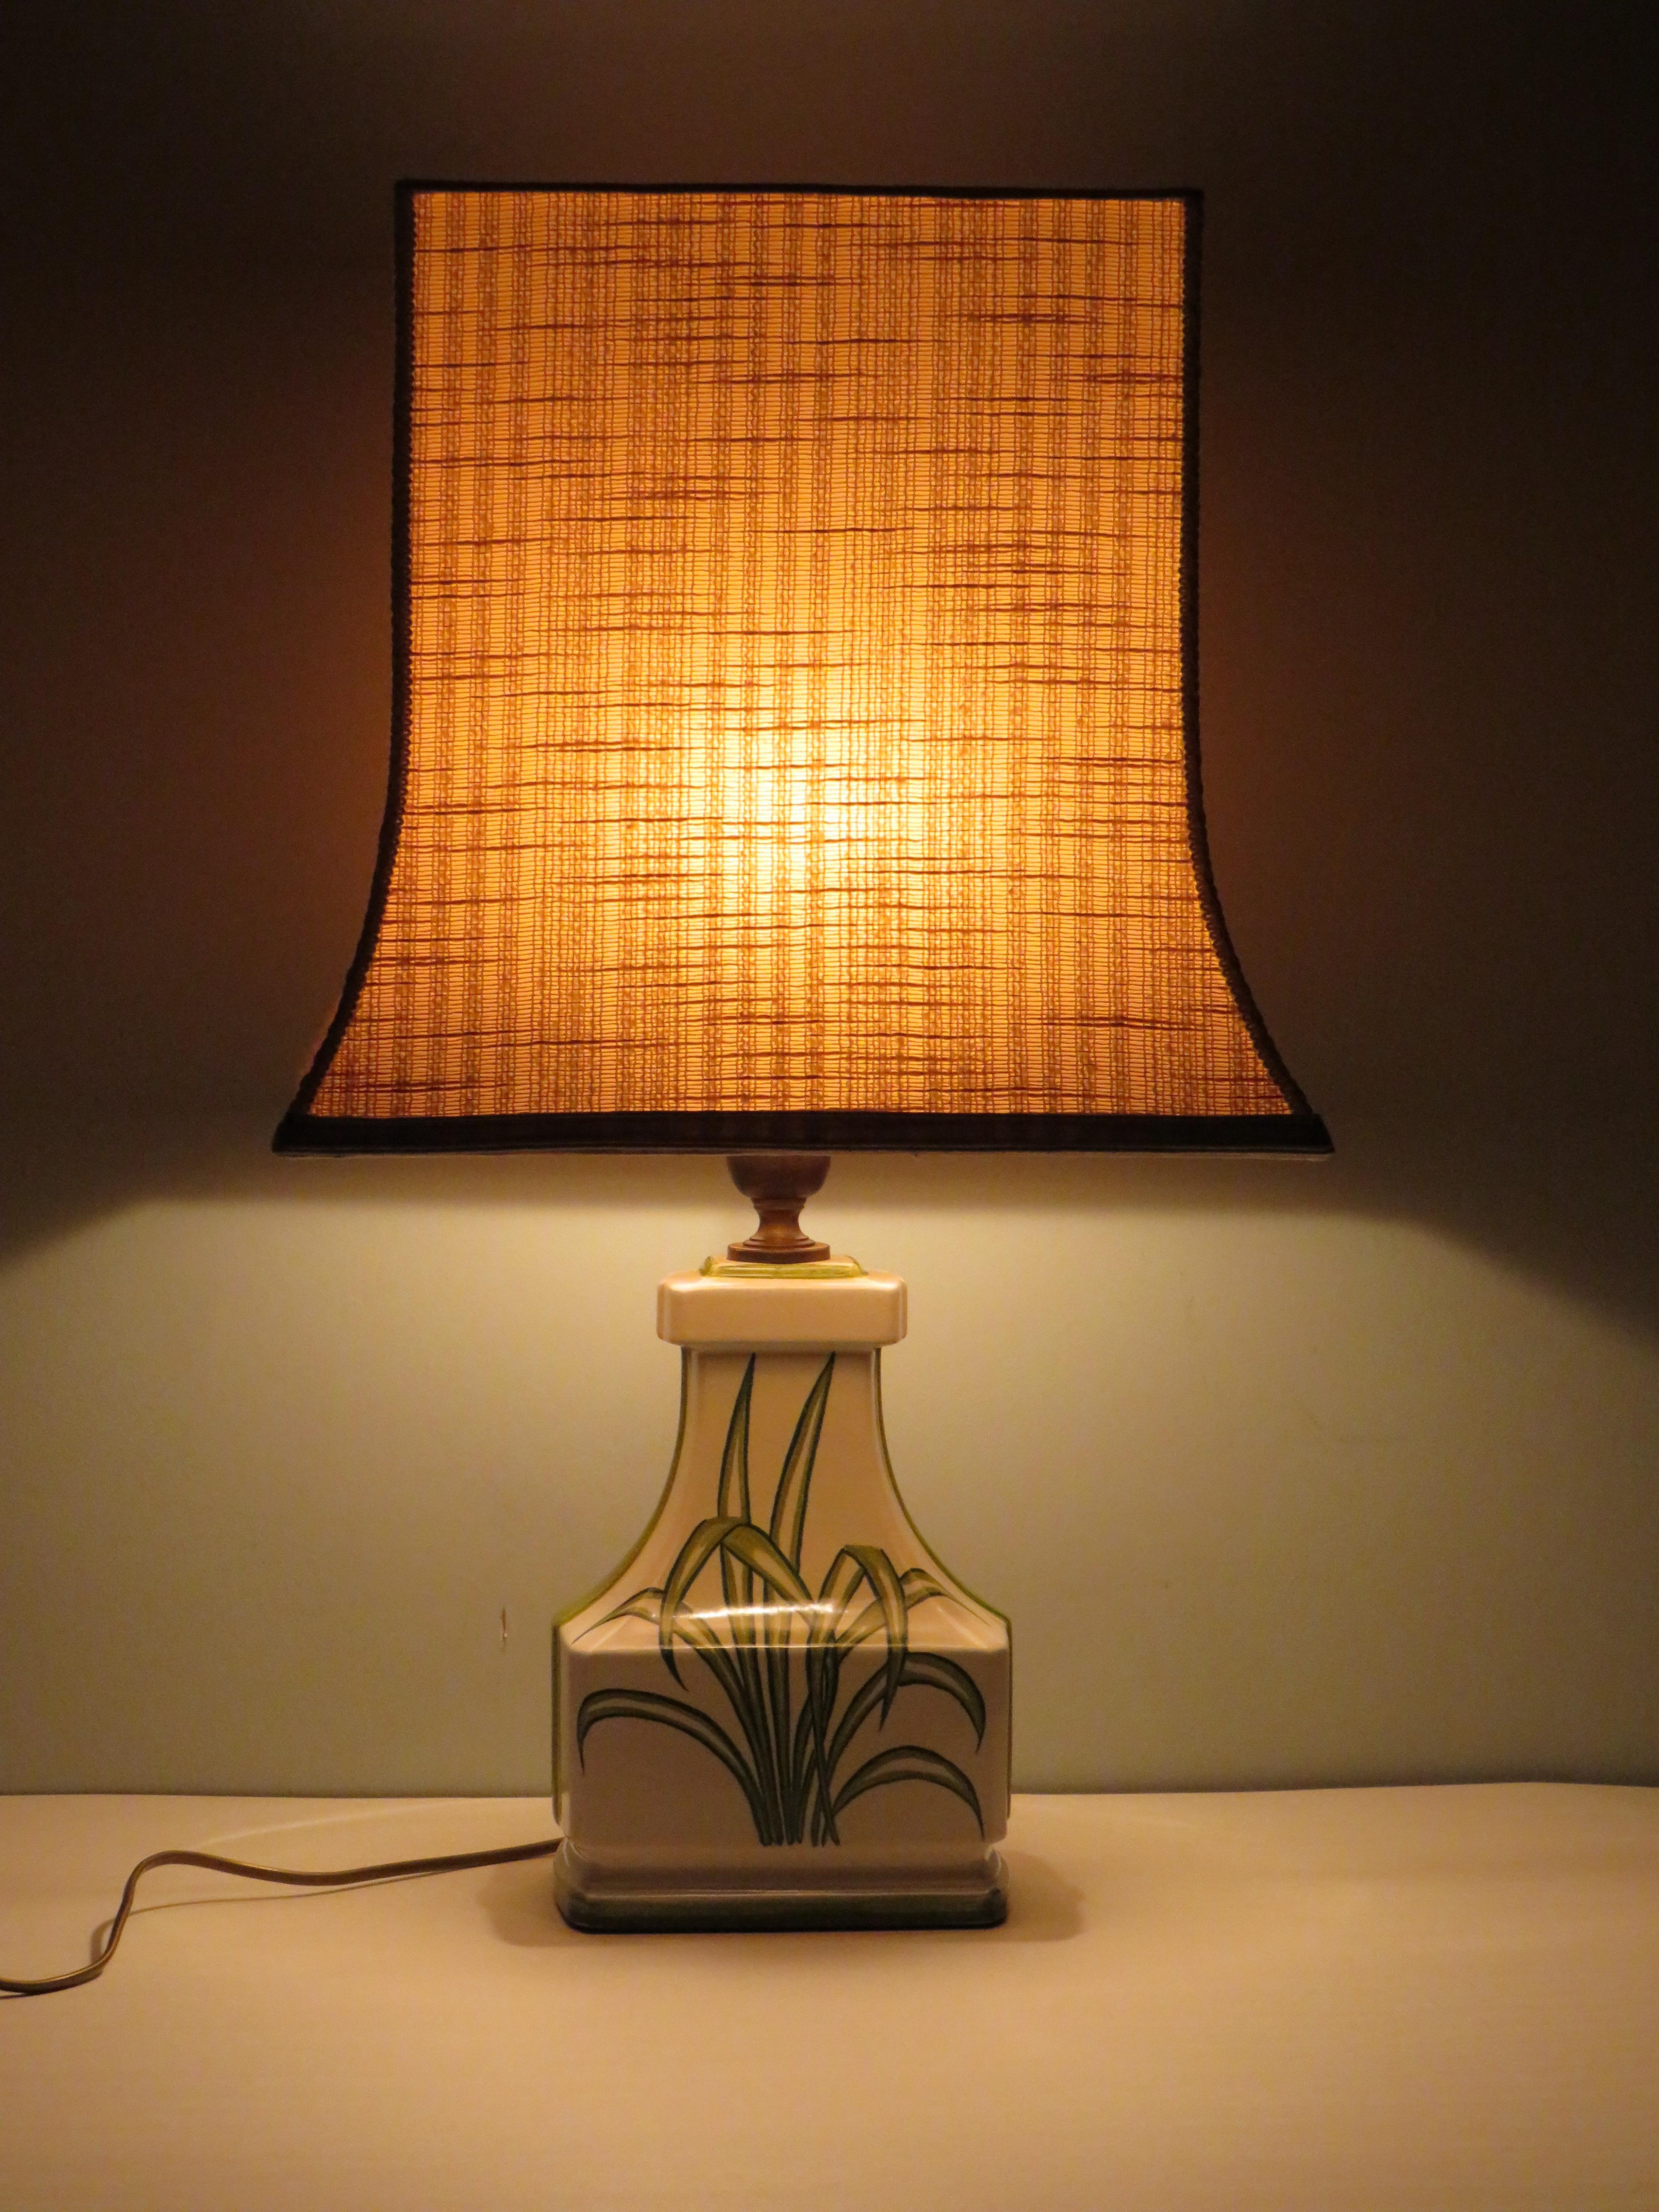 20th Century Mid-Century Ceramic Table Lamp with Pagoda Shaped Lampshade, France, 1960s For Sale